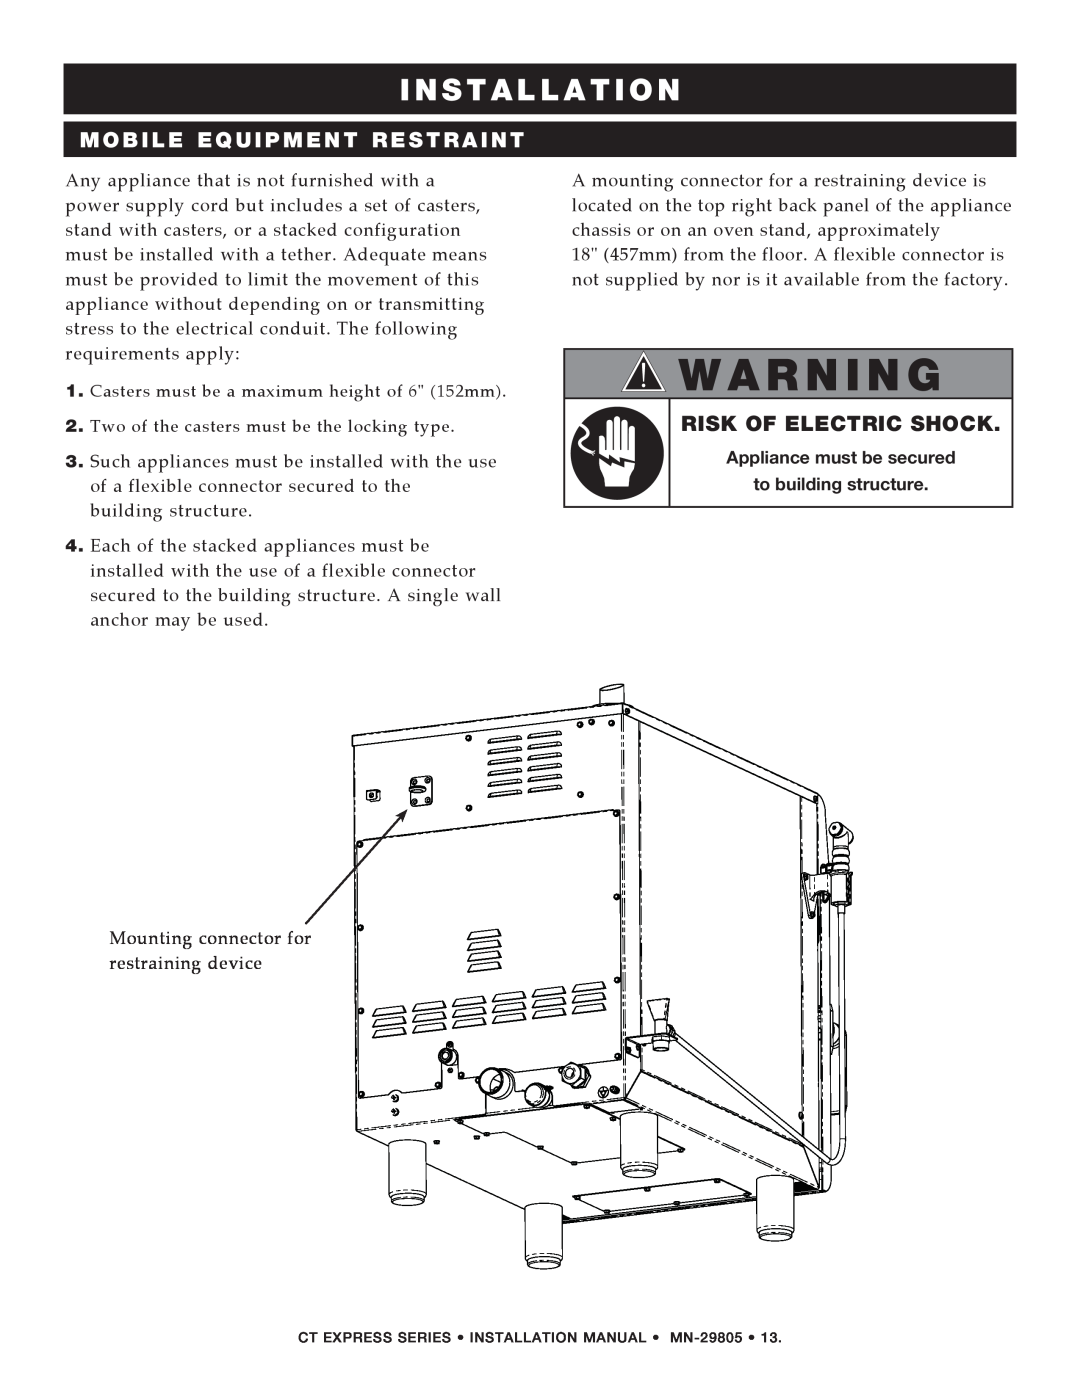 Alto-Shaam Combination Oven/Steamer manual Mobile Equipment Restraint, Risk Of Electric Shock, I N S T A L L A T I O N 